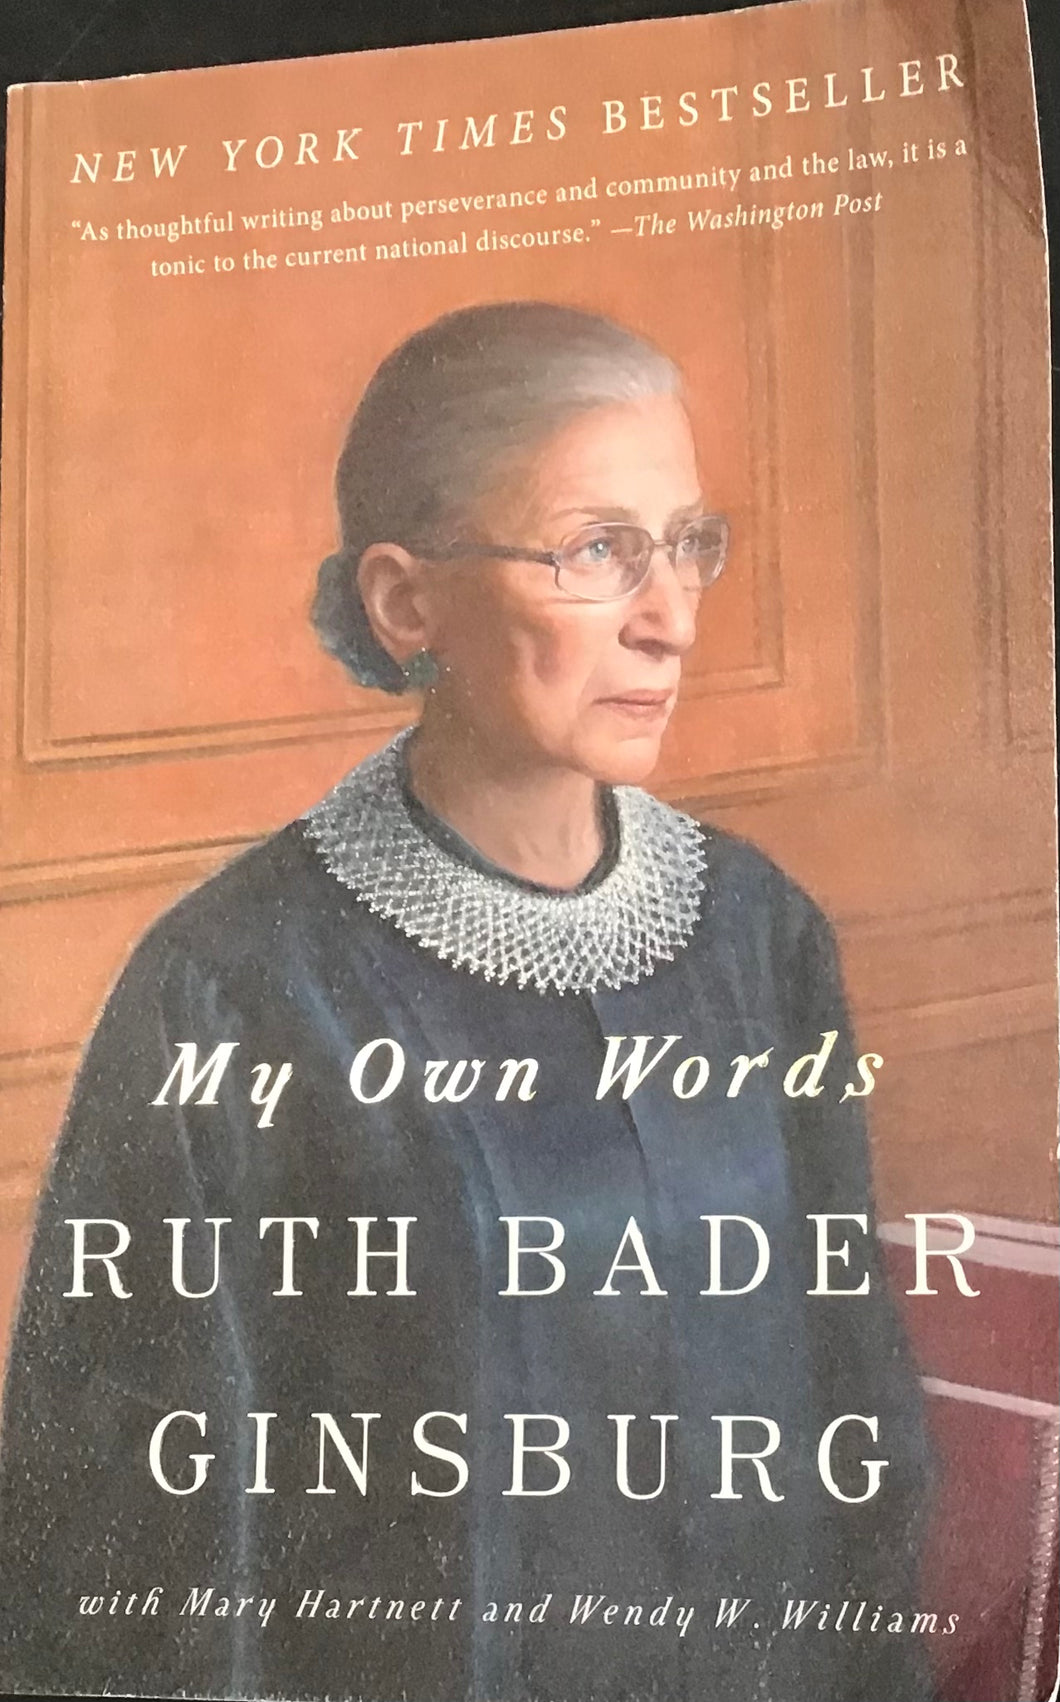 My Own Words, Ruth Badger Ginsburg